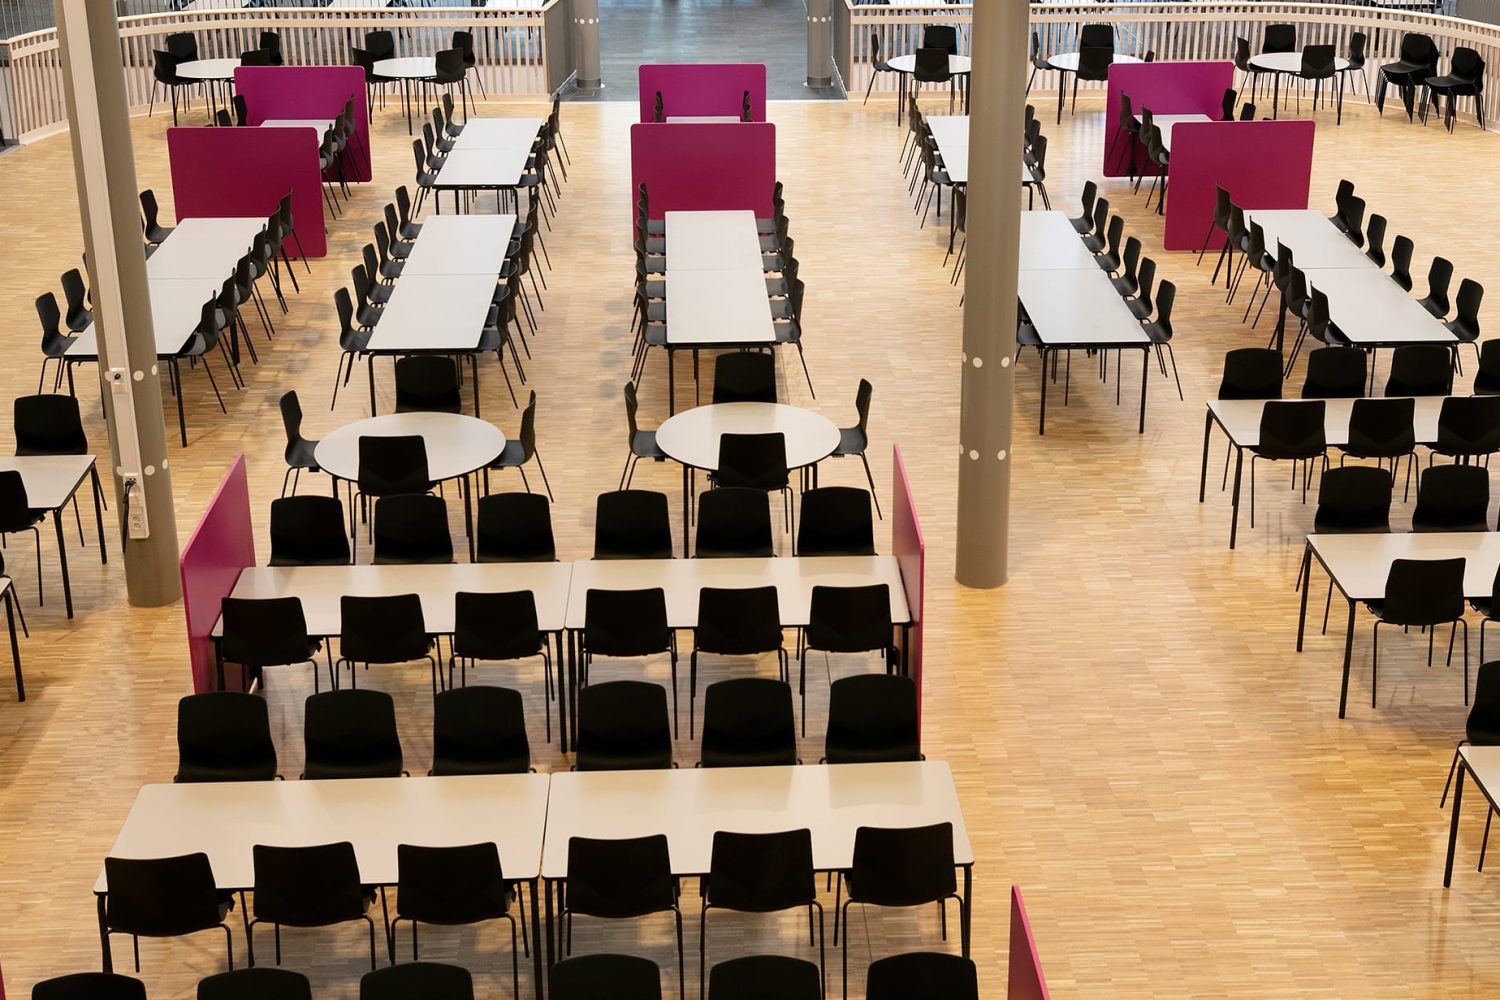 A large hall with office tables and chairs.